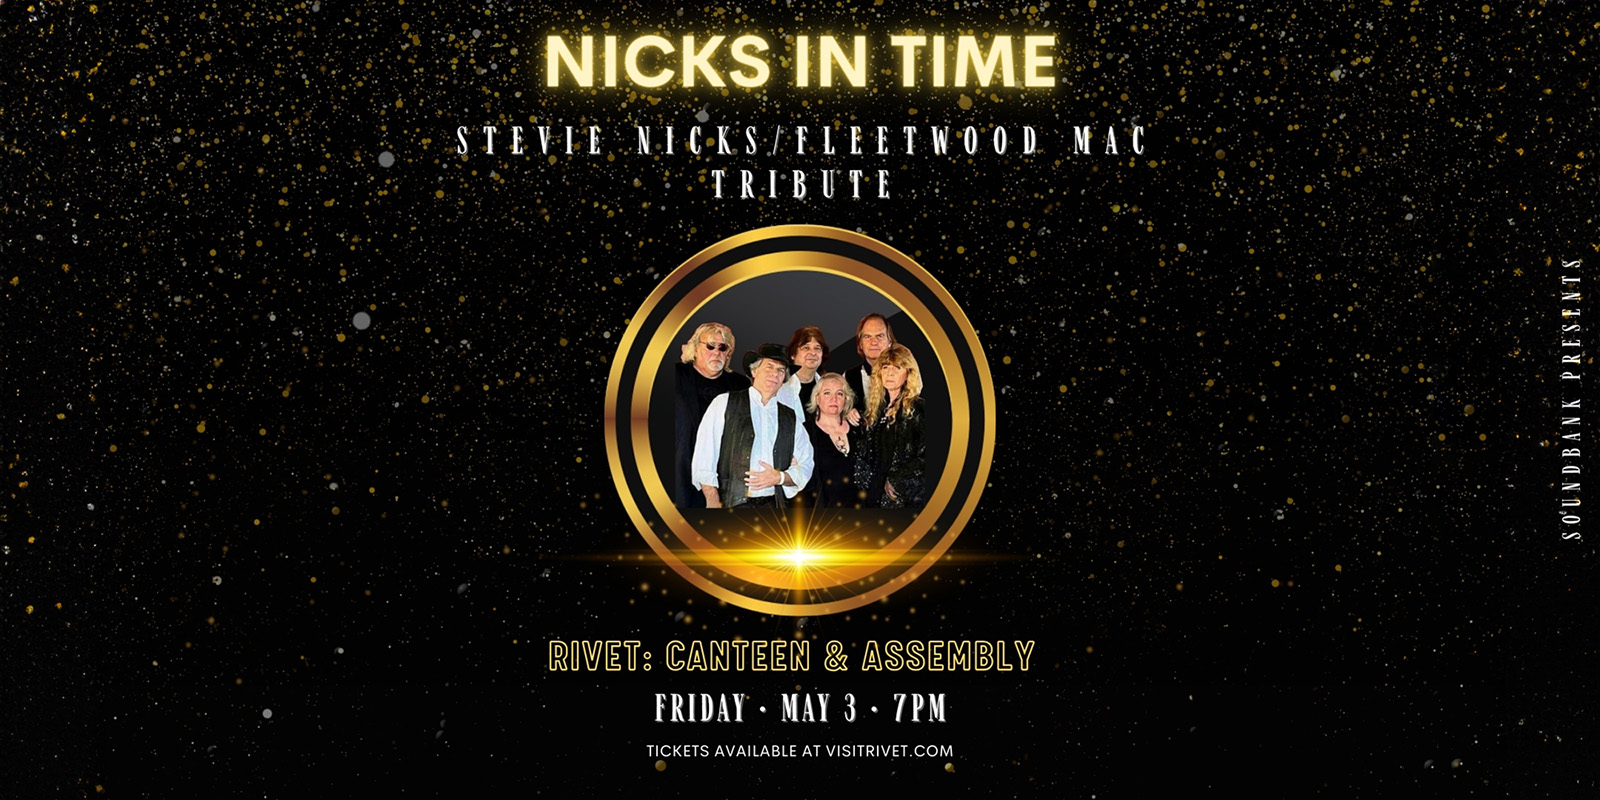 Nicks In Time concert live at Rivet: Canteen & Assembly on Friday, May 3rd, 2024. Be there! Doors at 7:00 PM and all ages are welcome.